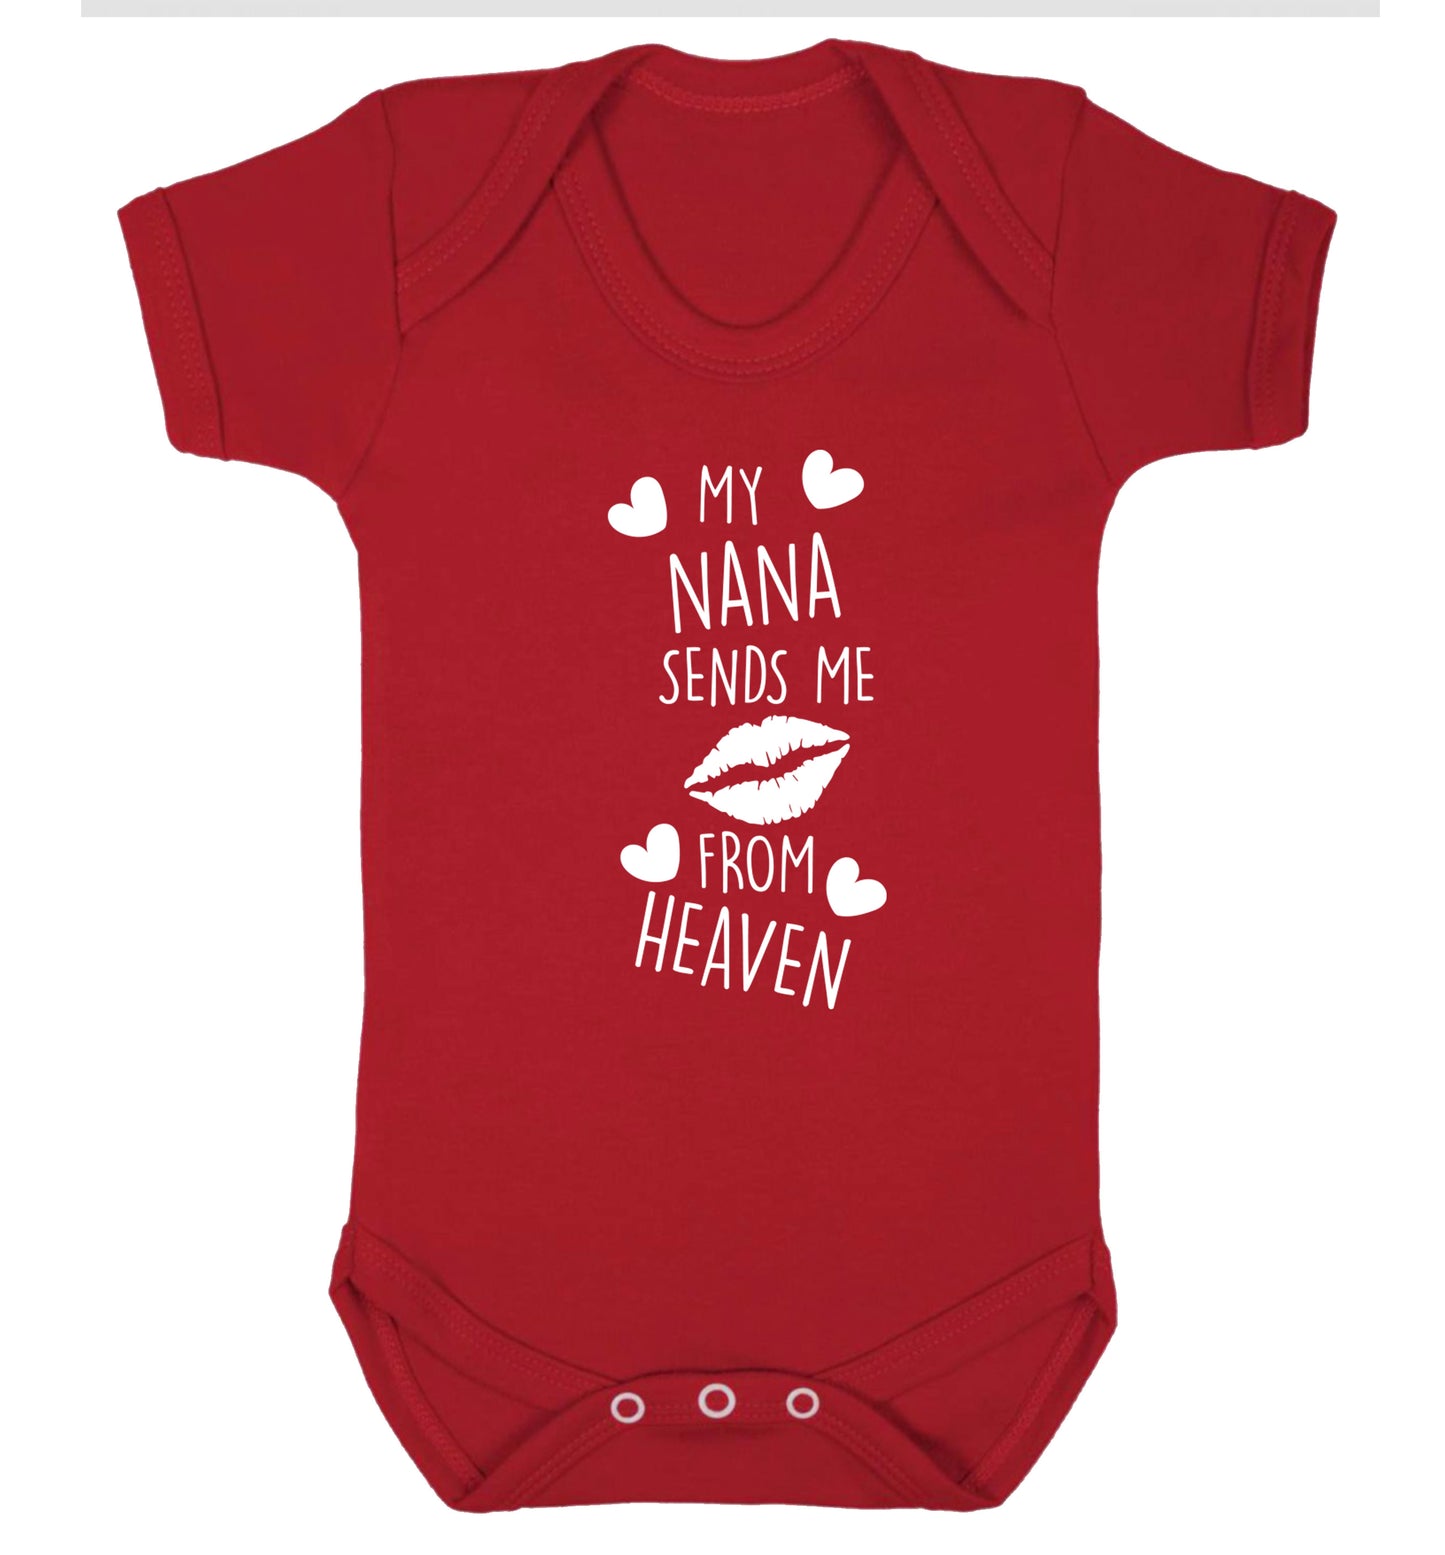 My nana sends me kisses from heaven Baby Vest red 18-24 months